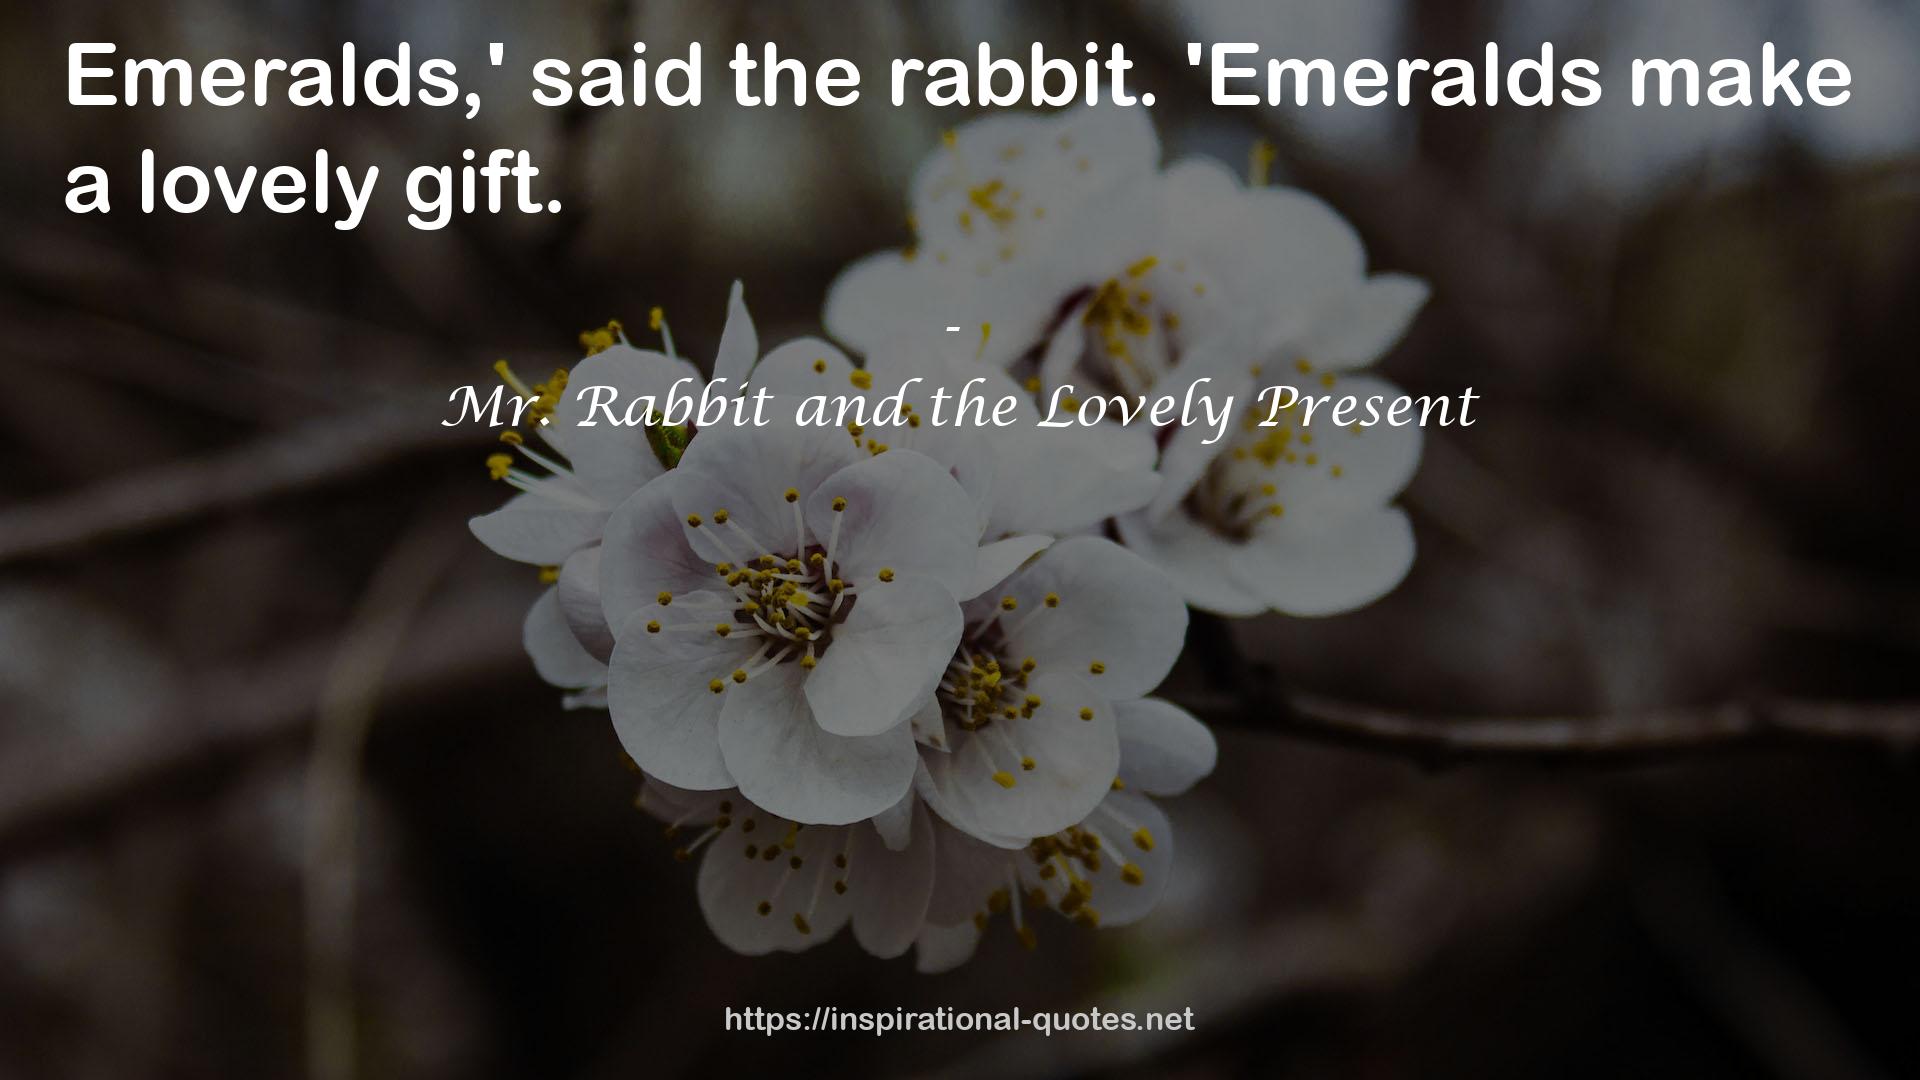 Mr. Rabbit and the Lovely Present QUOTES